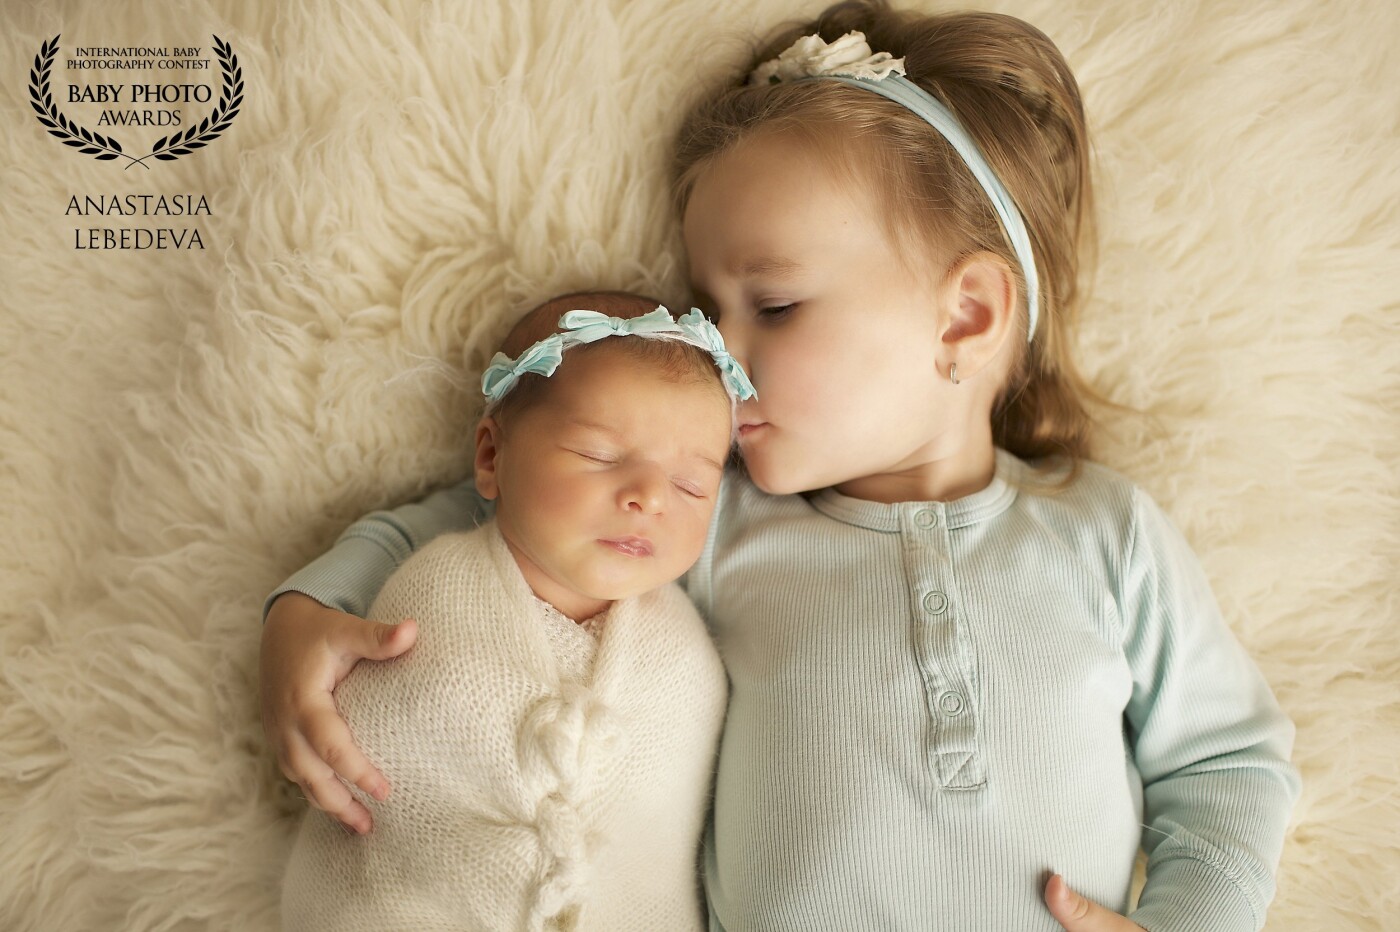 Look at this touching photo, where the older sister gently hugs and cuddles her newborn younger sister. The very love and tenderness in this frame.